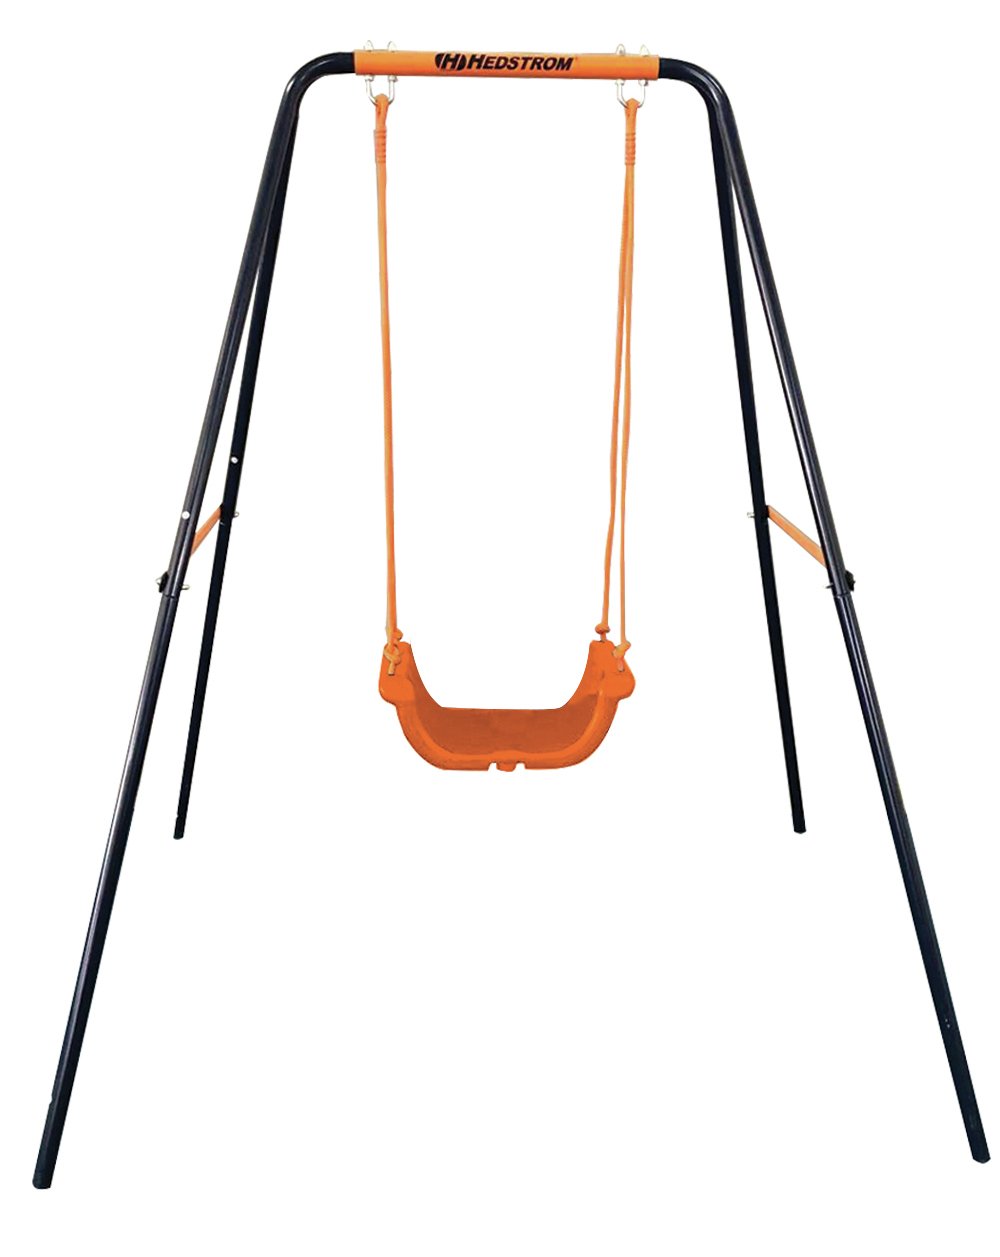 Hedstrom Deluxe 3 in 1 Toddler and Kids Garden Swing Review